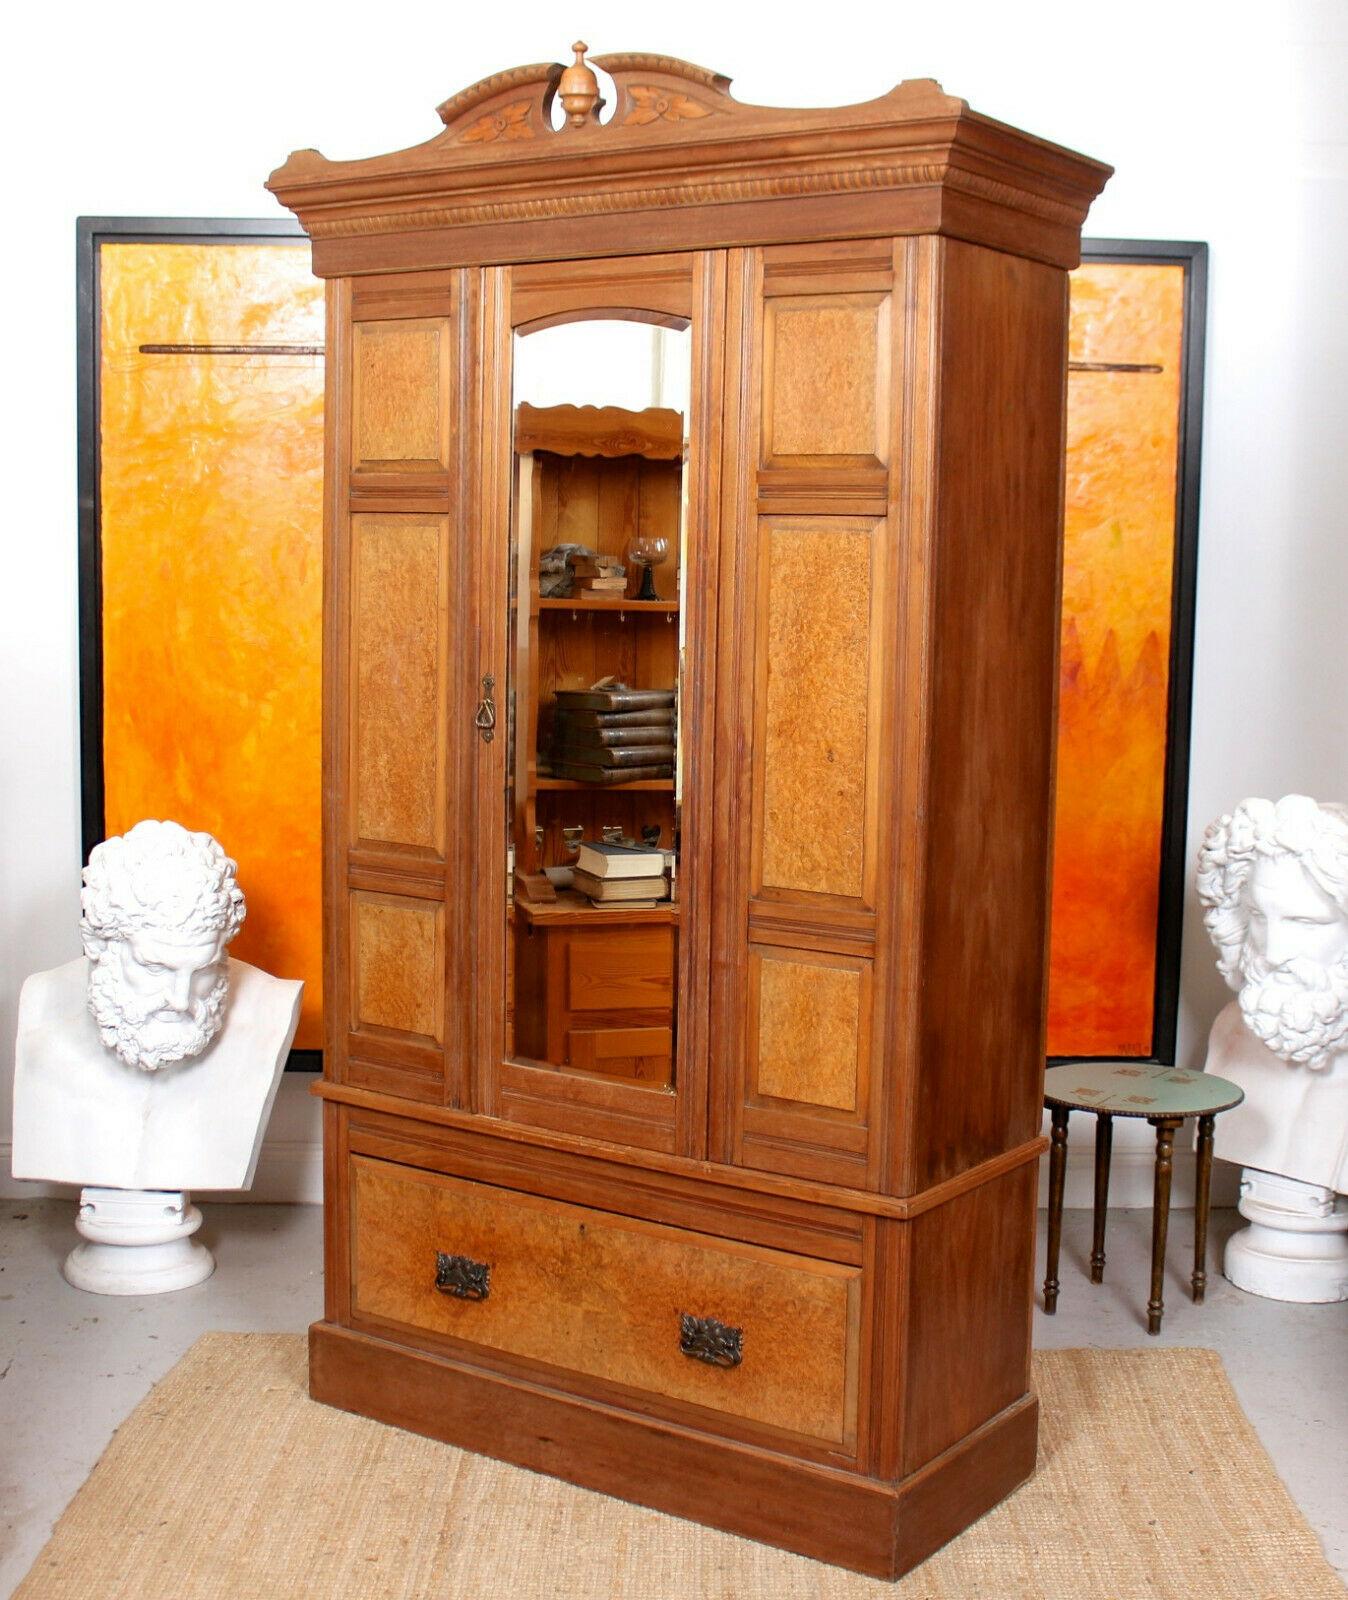 A fine quality 19th century burl walnut wardrobe.

A finely carved cornice above an arched bevelled mirrored door - flanked by burl walnut panels - enclosed hanging rails and hooks to the interior. Fitted a burl walnut drawer to the base mounted